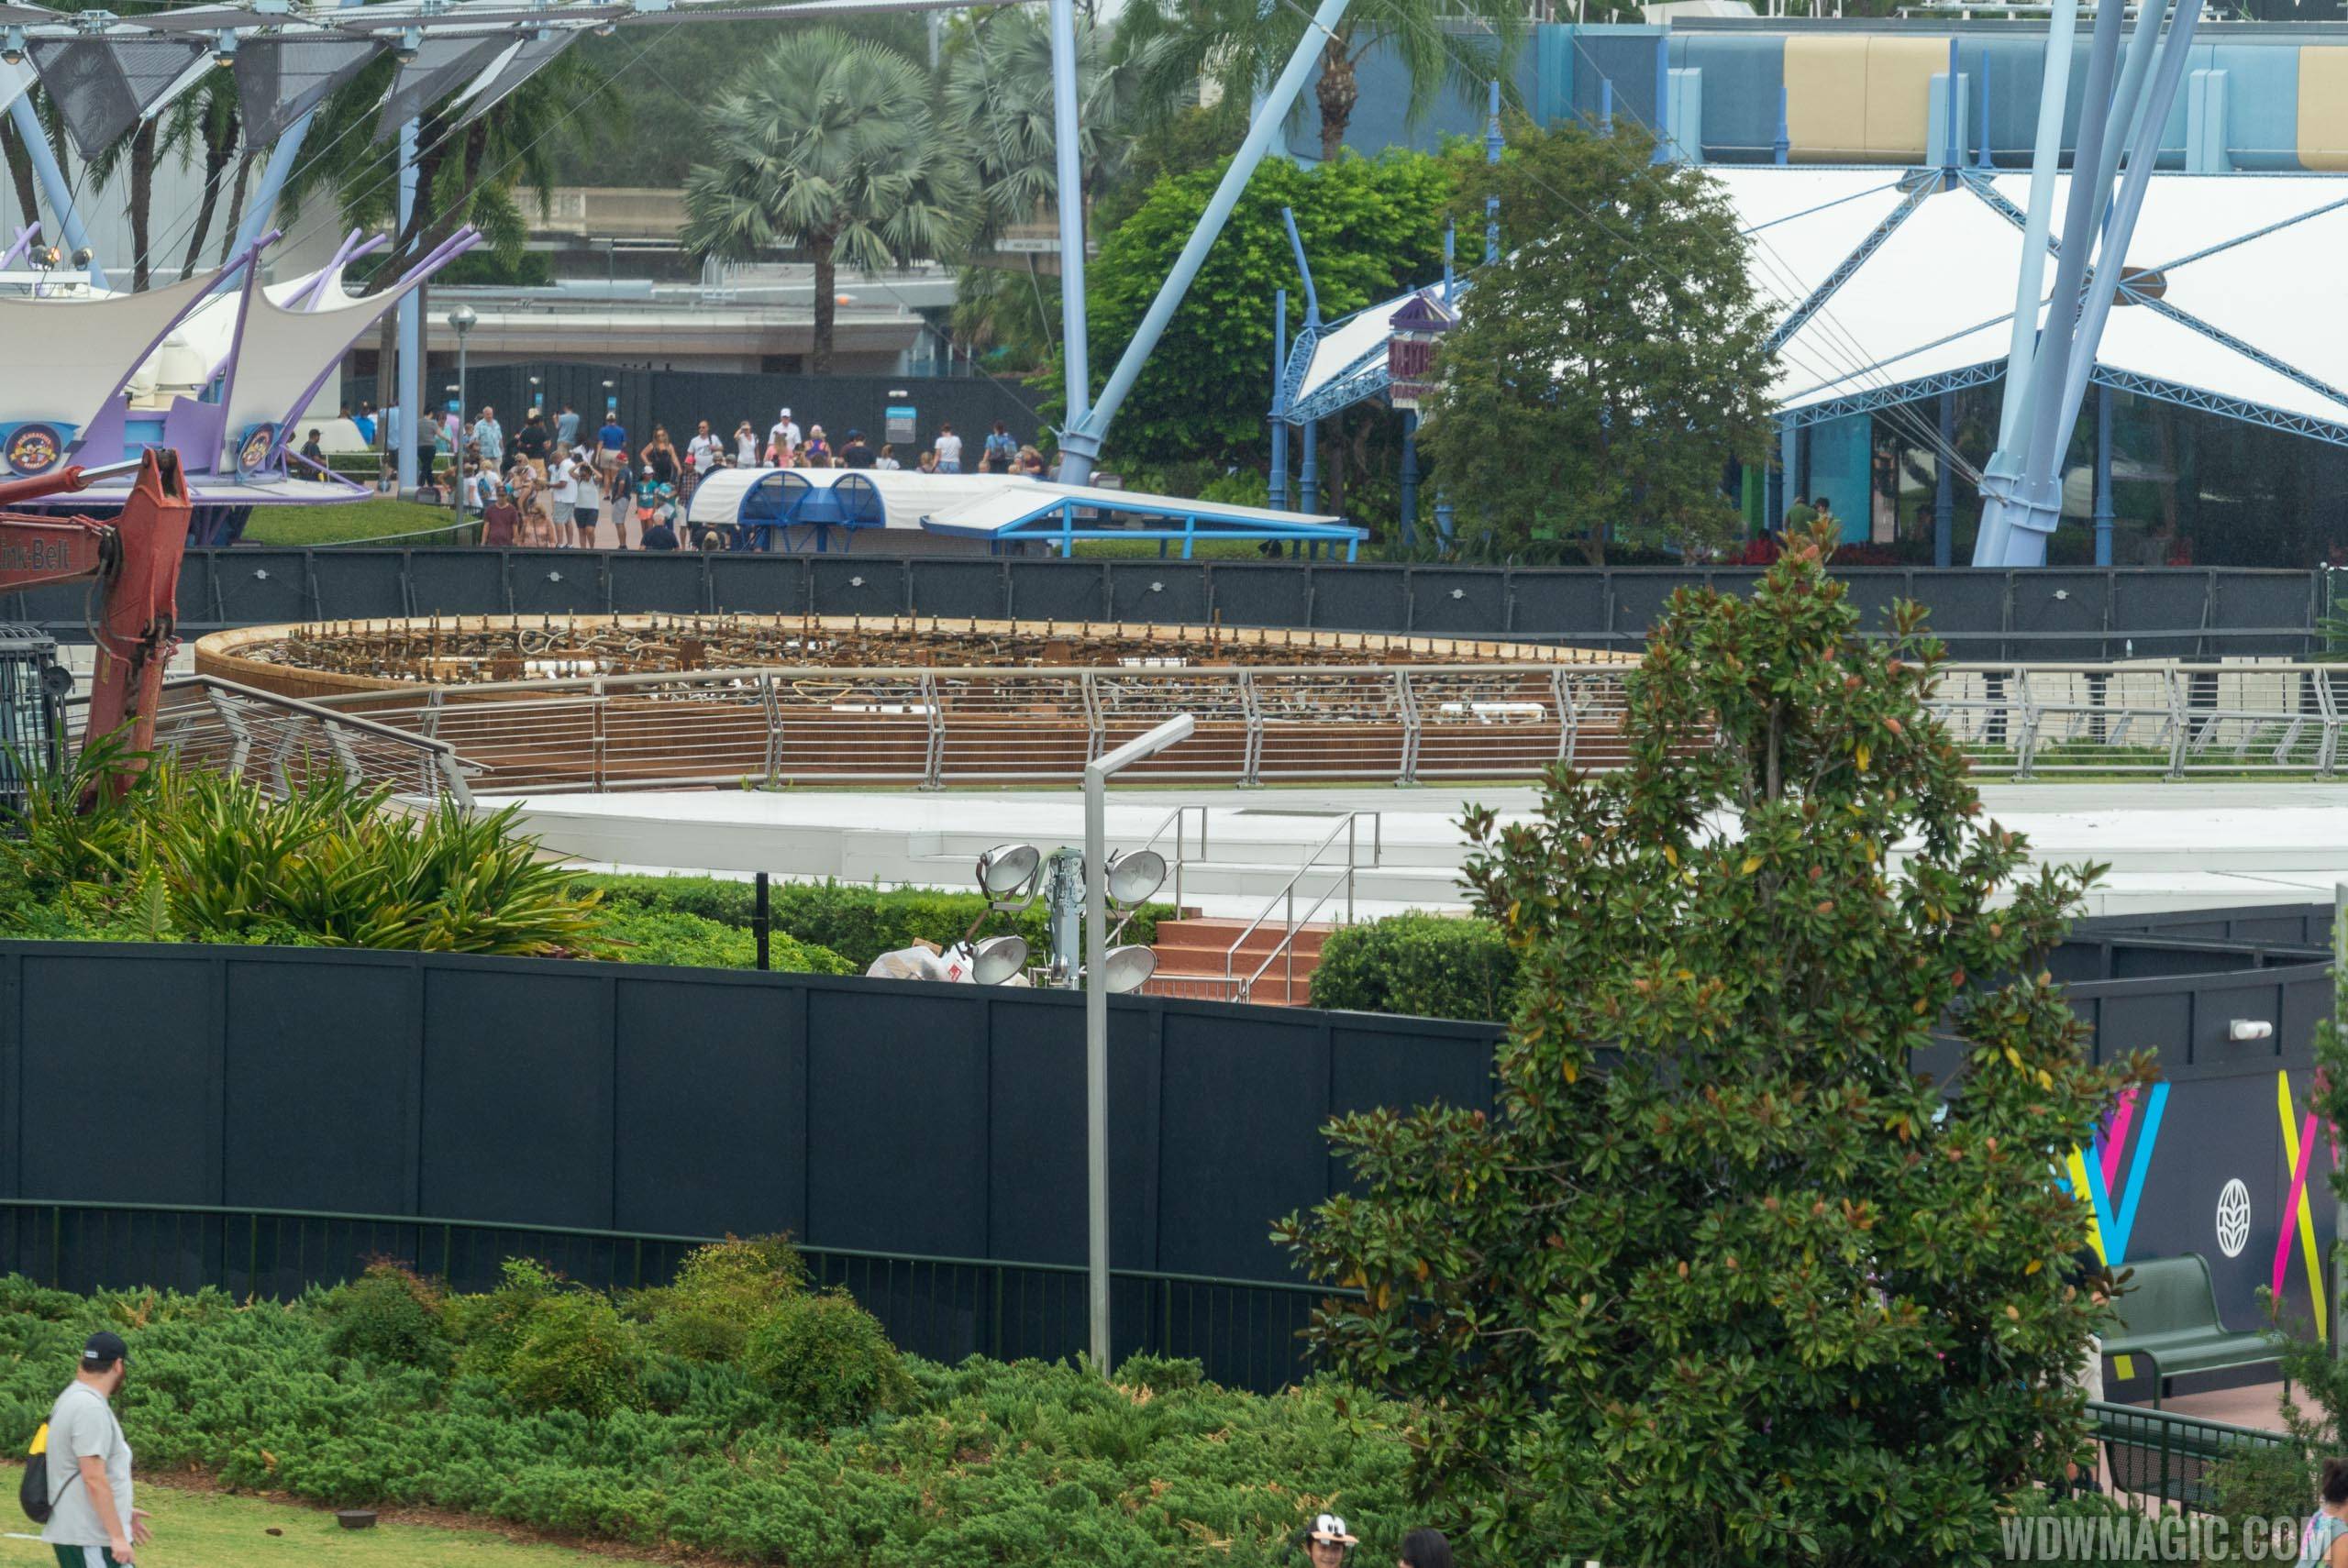 Epcot central area construction October 2019 - Looking toward Fountain of Nations